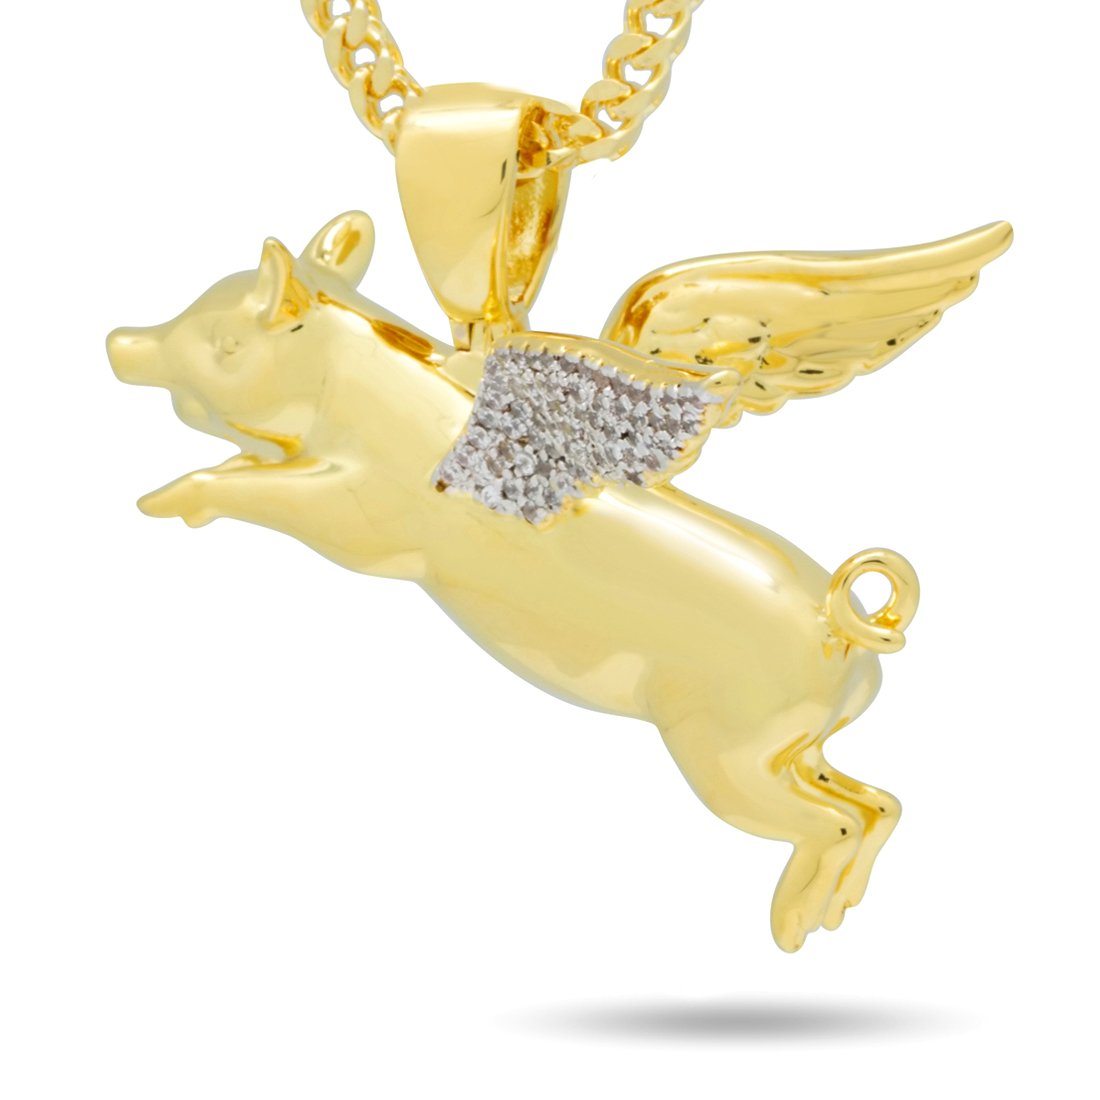 The Gold Flying Pig Necklace